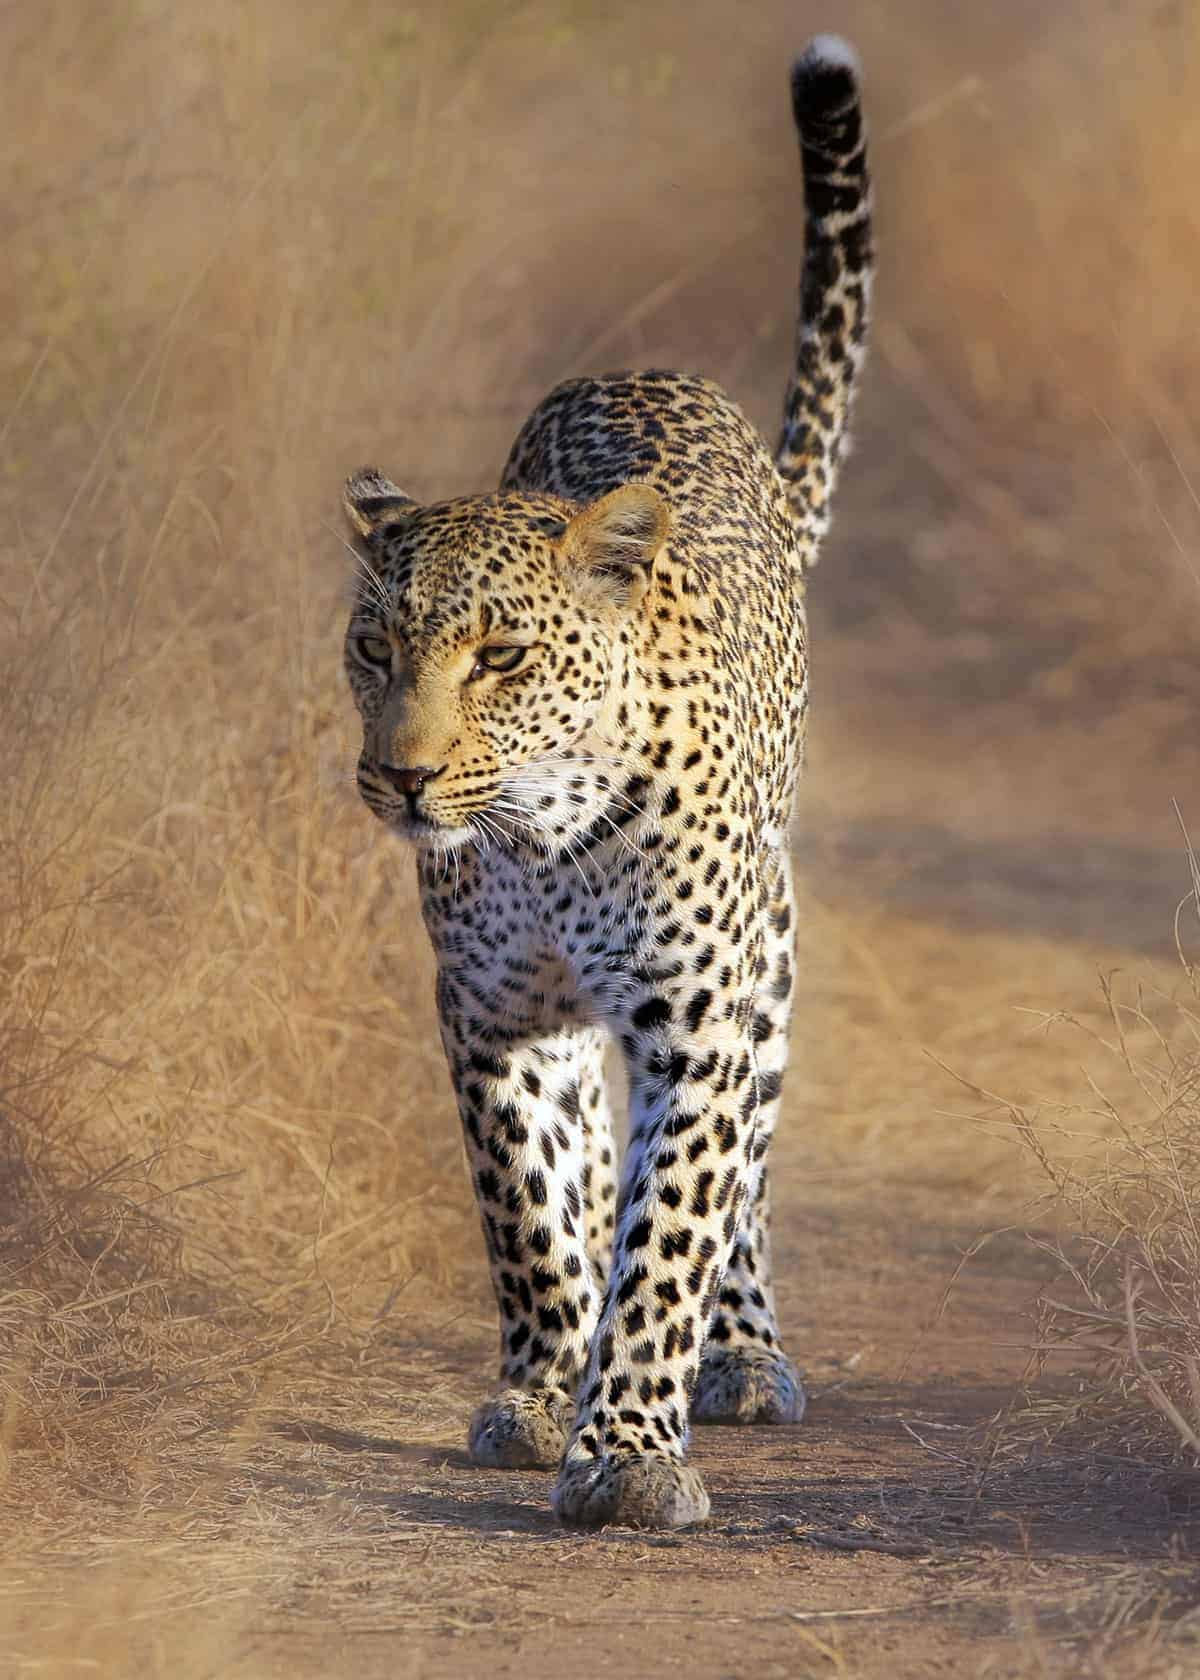 Leopard facts